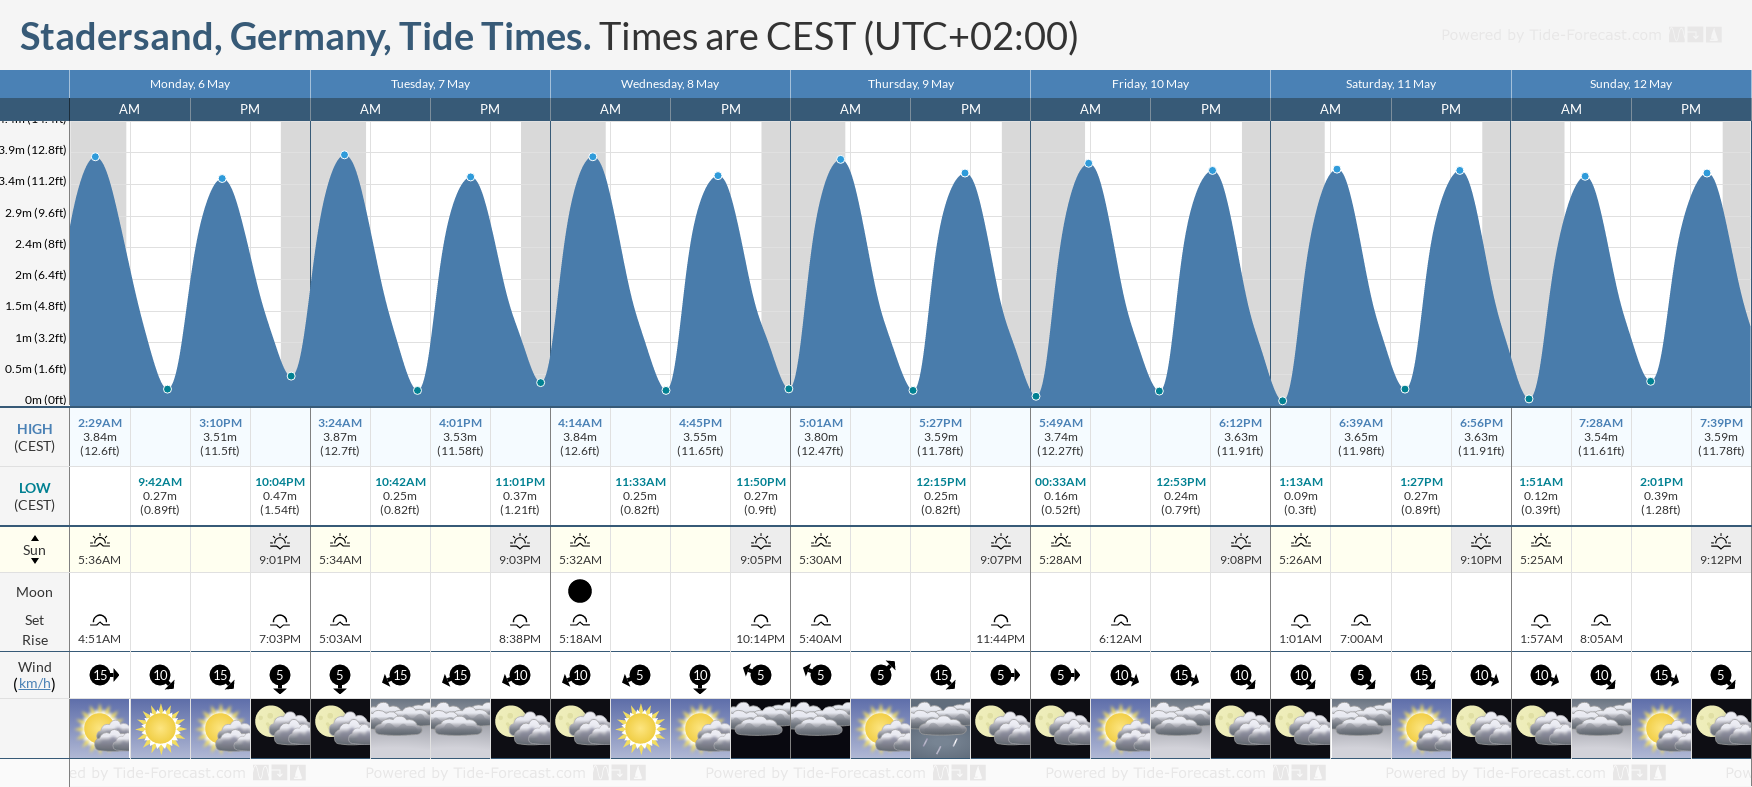 Stadersand, Germany Tide Chart including high and low tide tide times for the next 7 days